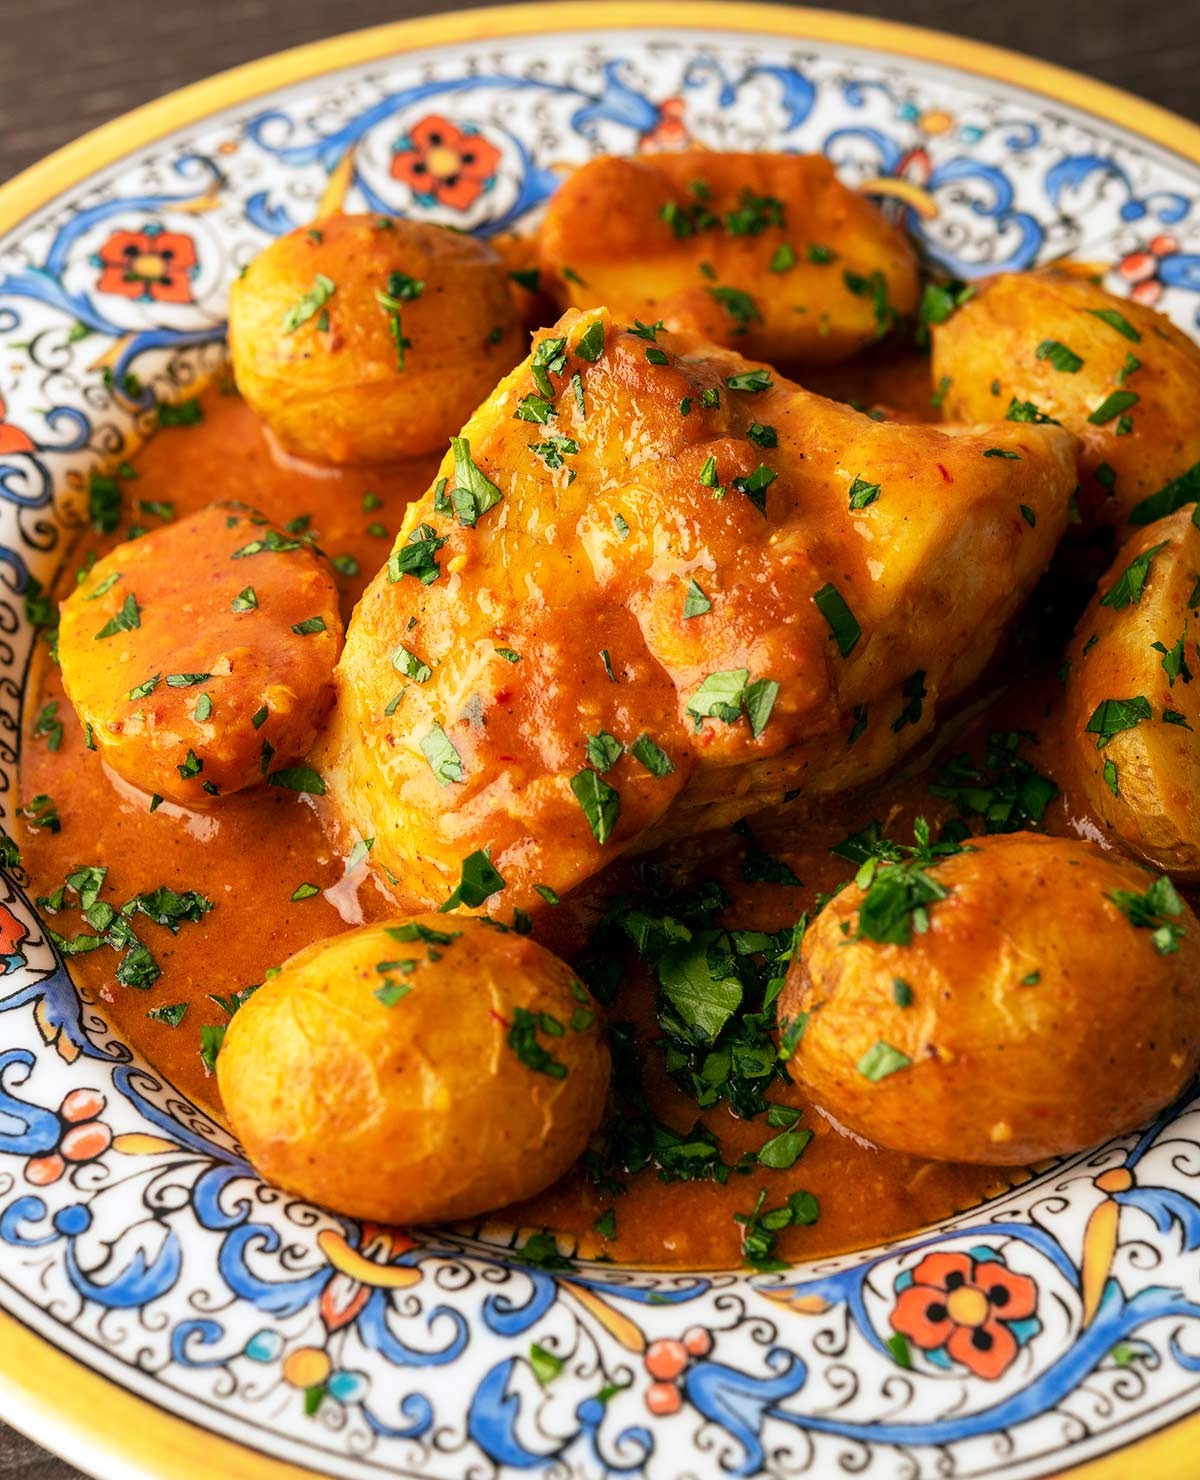 Closeup of Catalan monkfish on a plate with potatoes